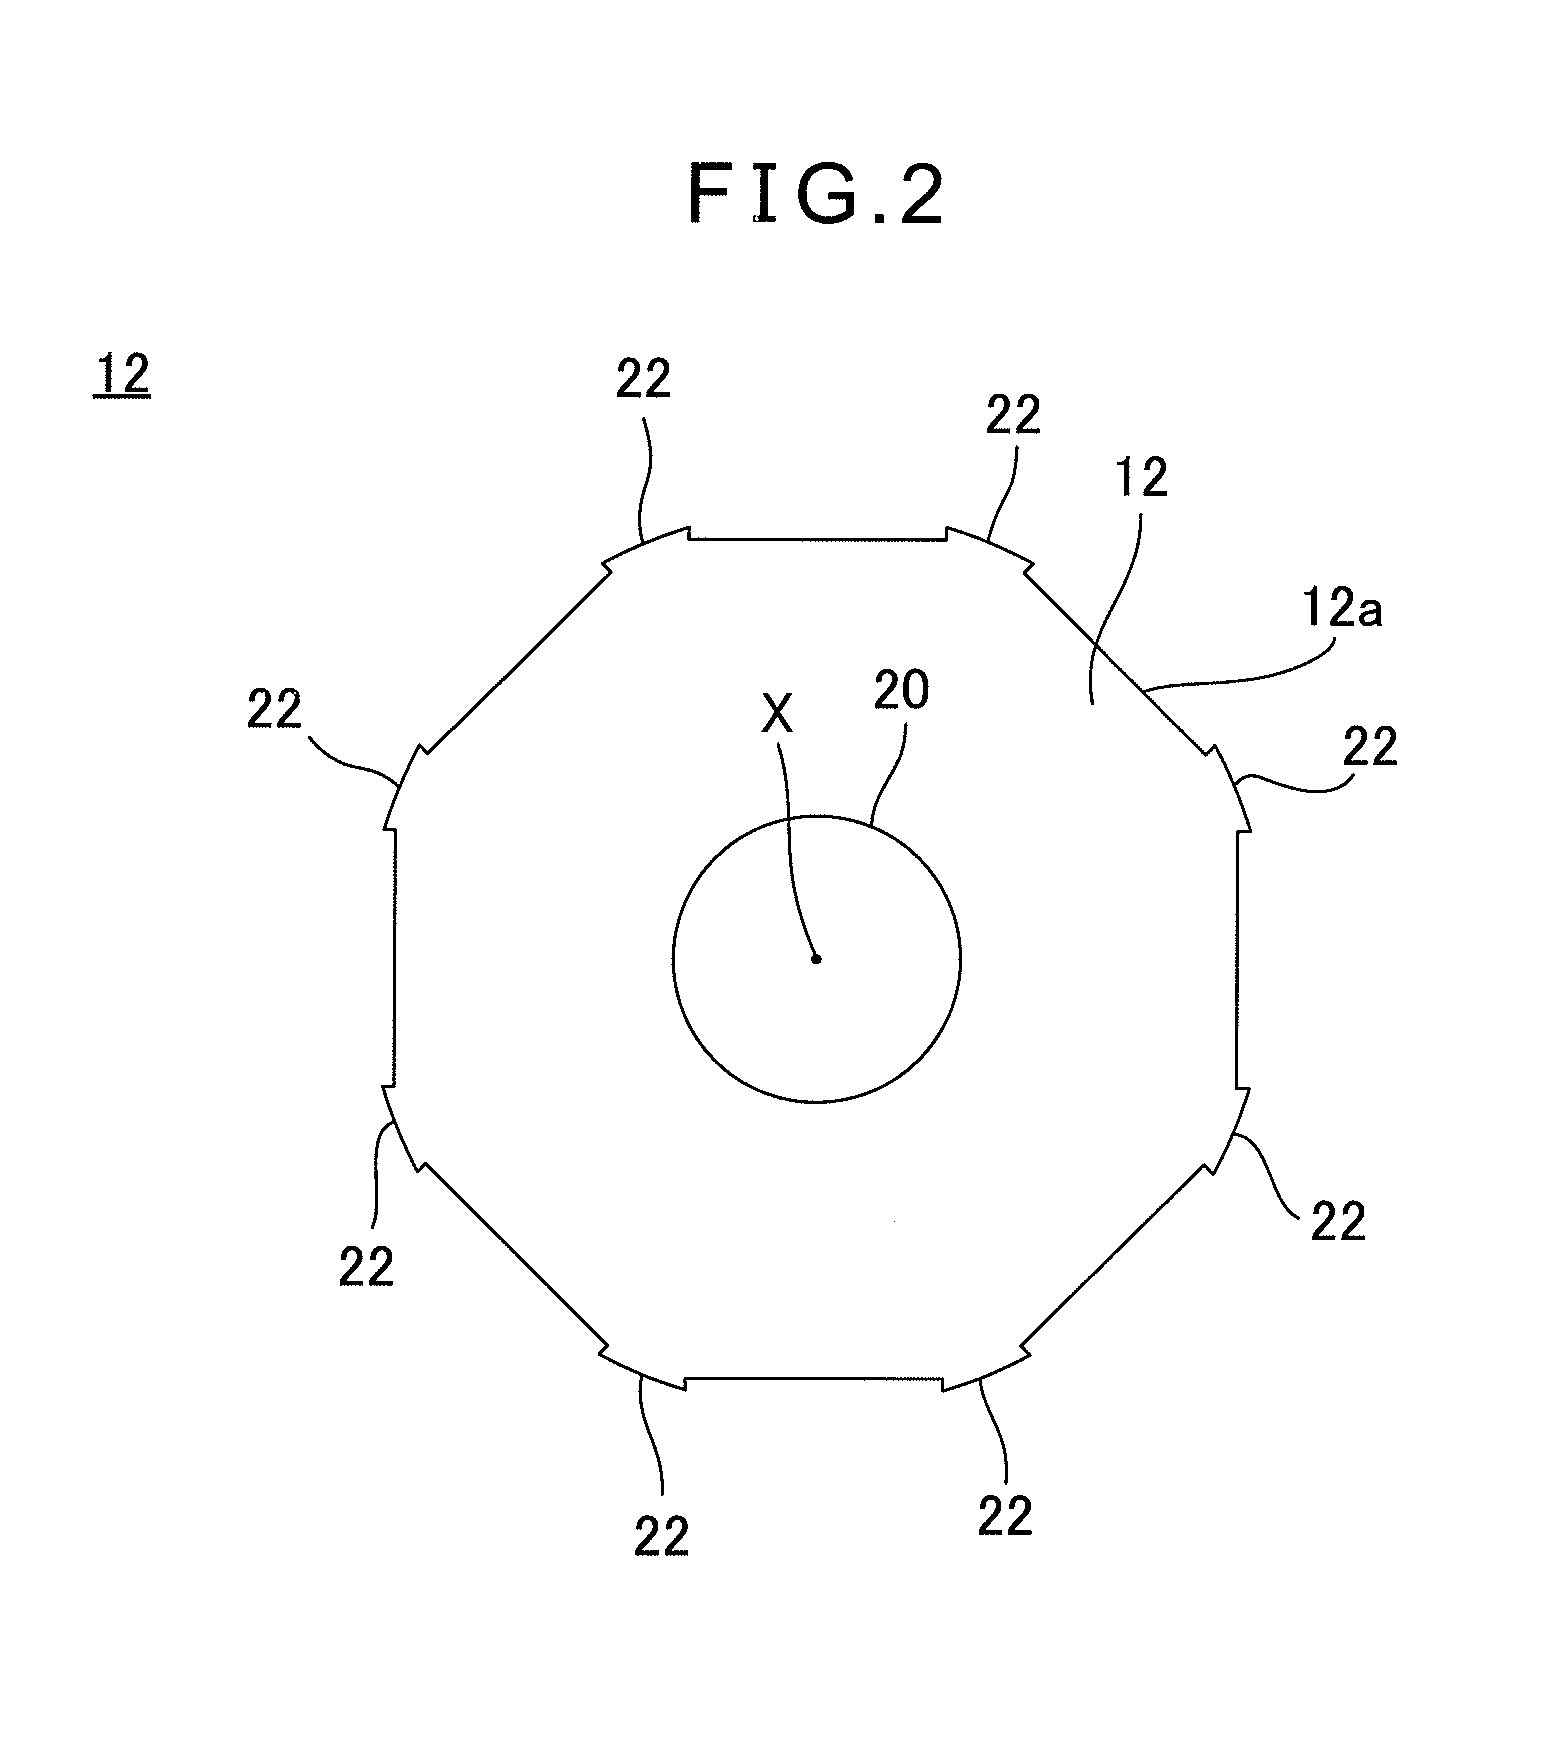 Rotor of electric motor having structure for attaching magnet securely to outer circumferential surface of rotor core and manufacturing method thereof